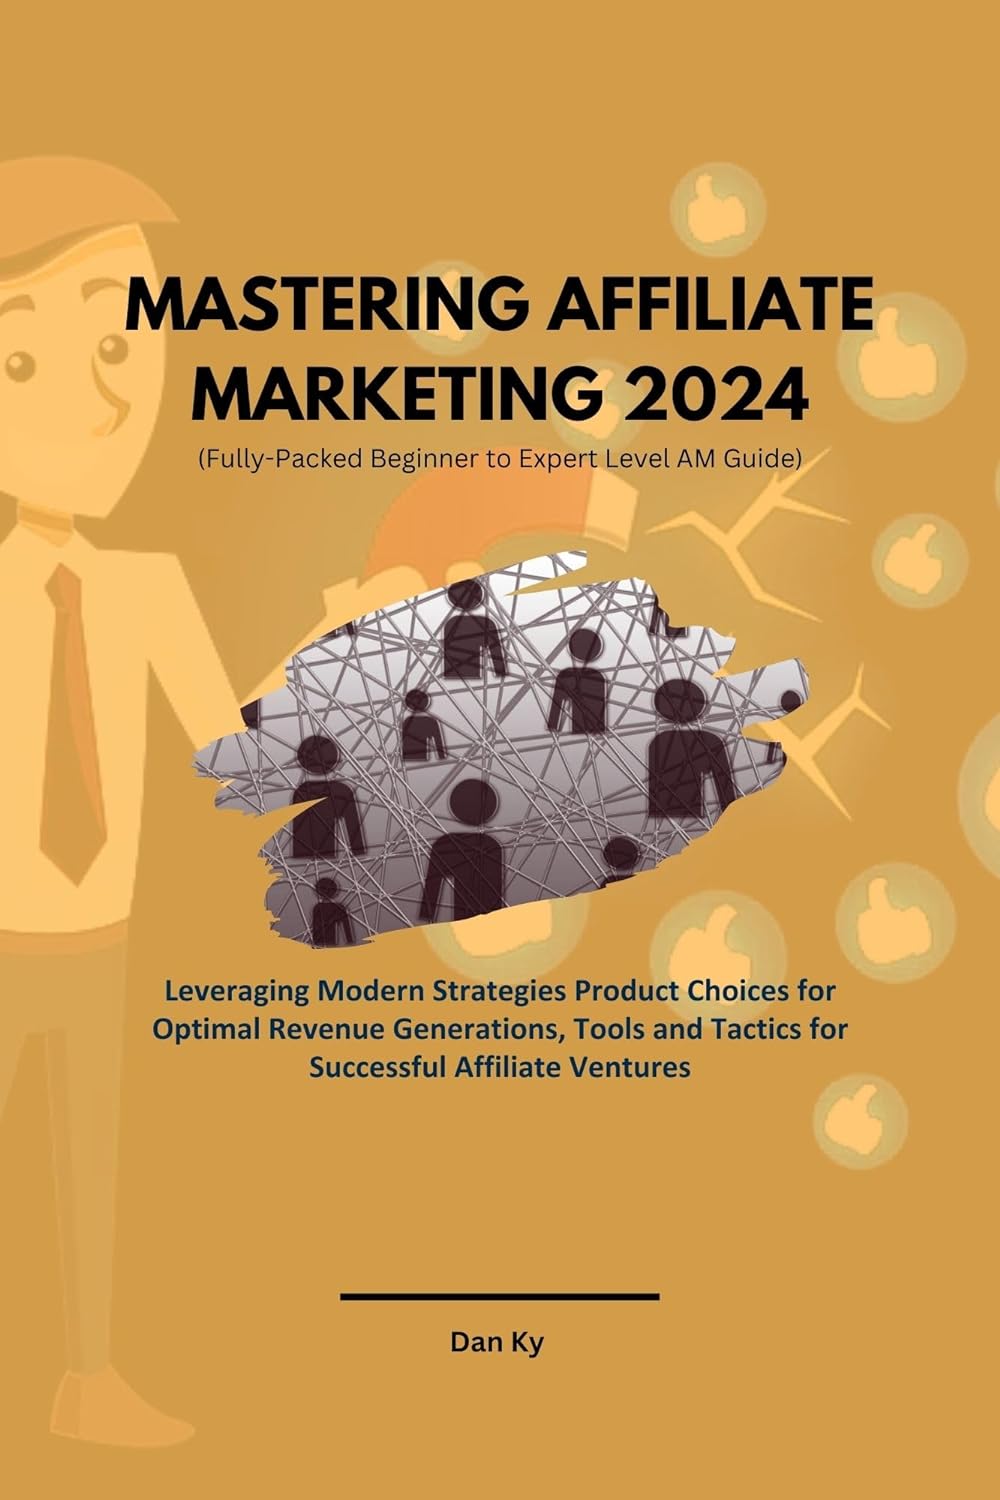 Mastering Affiliate Marketing 2024 Review